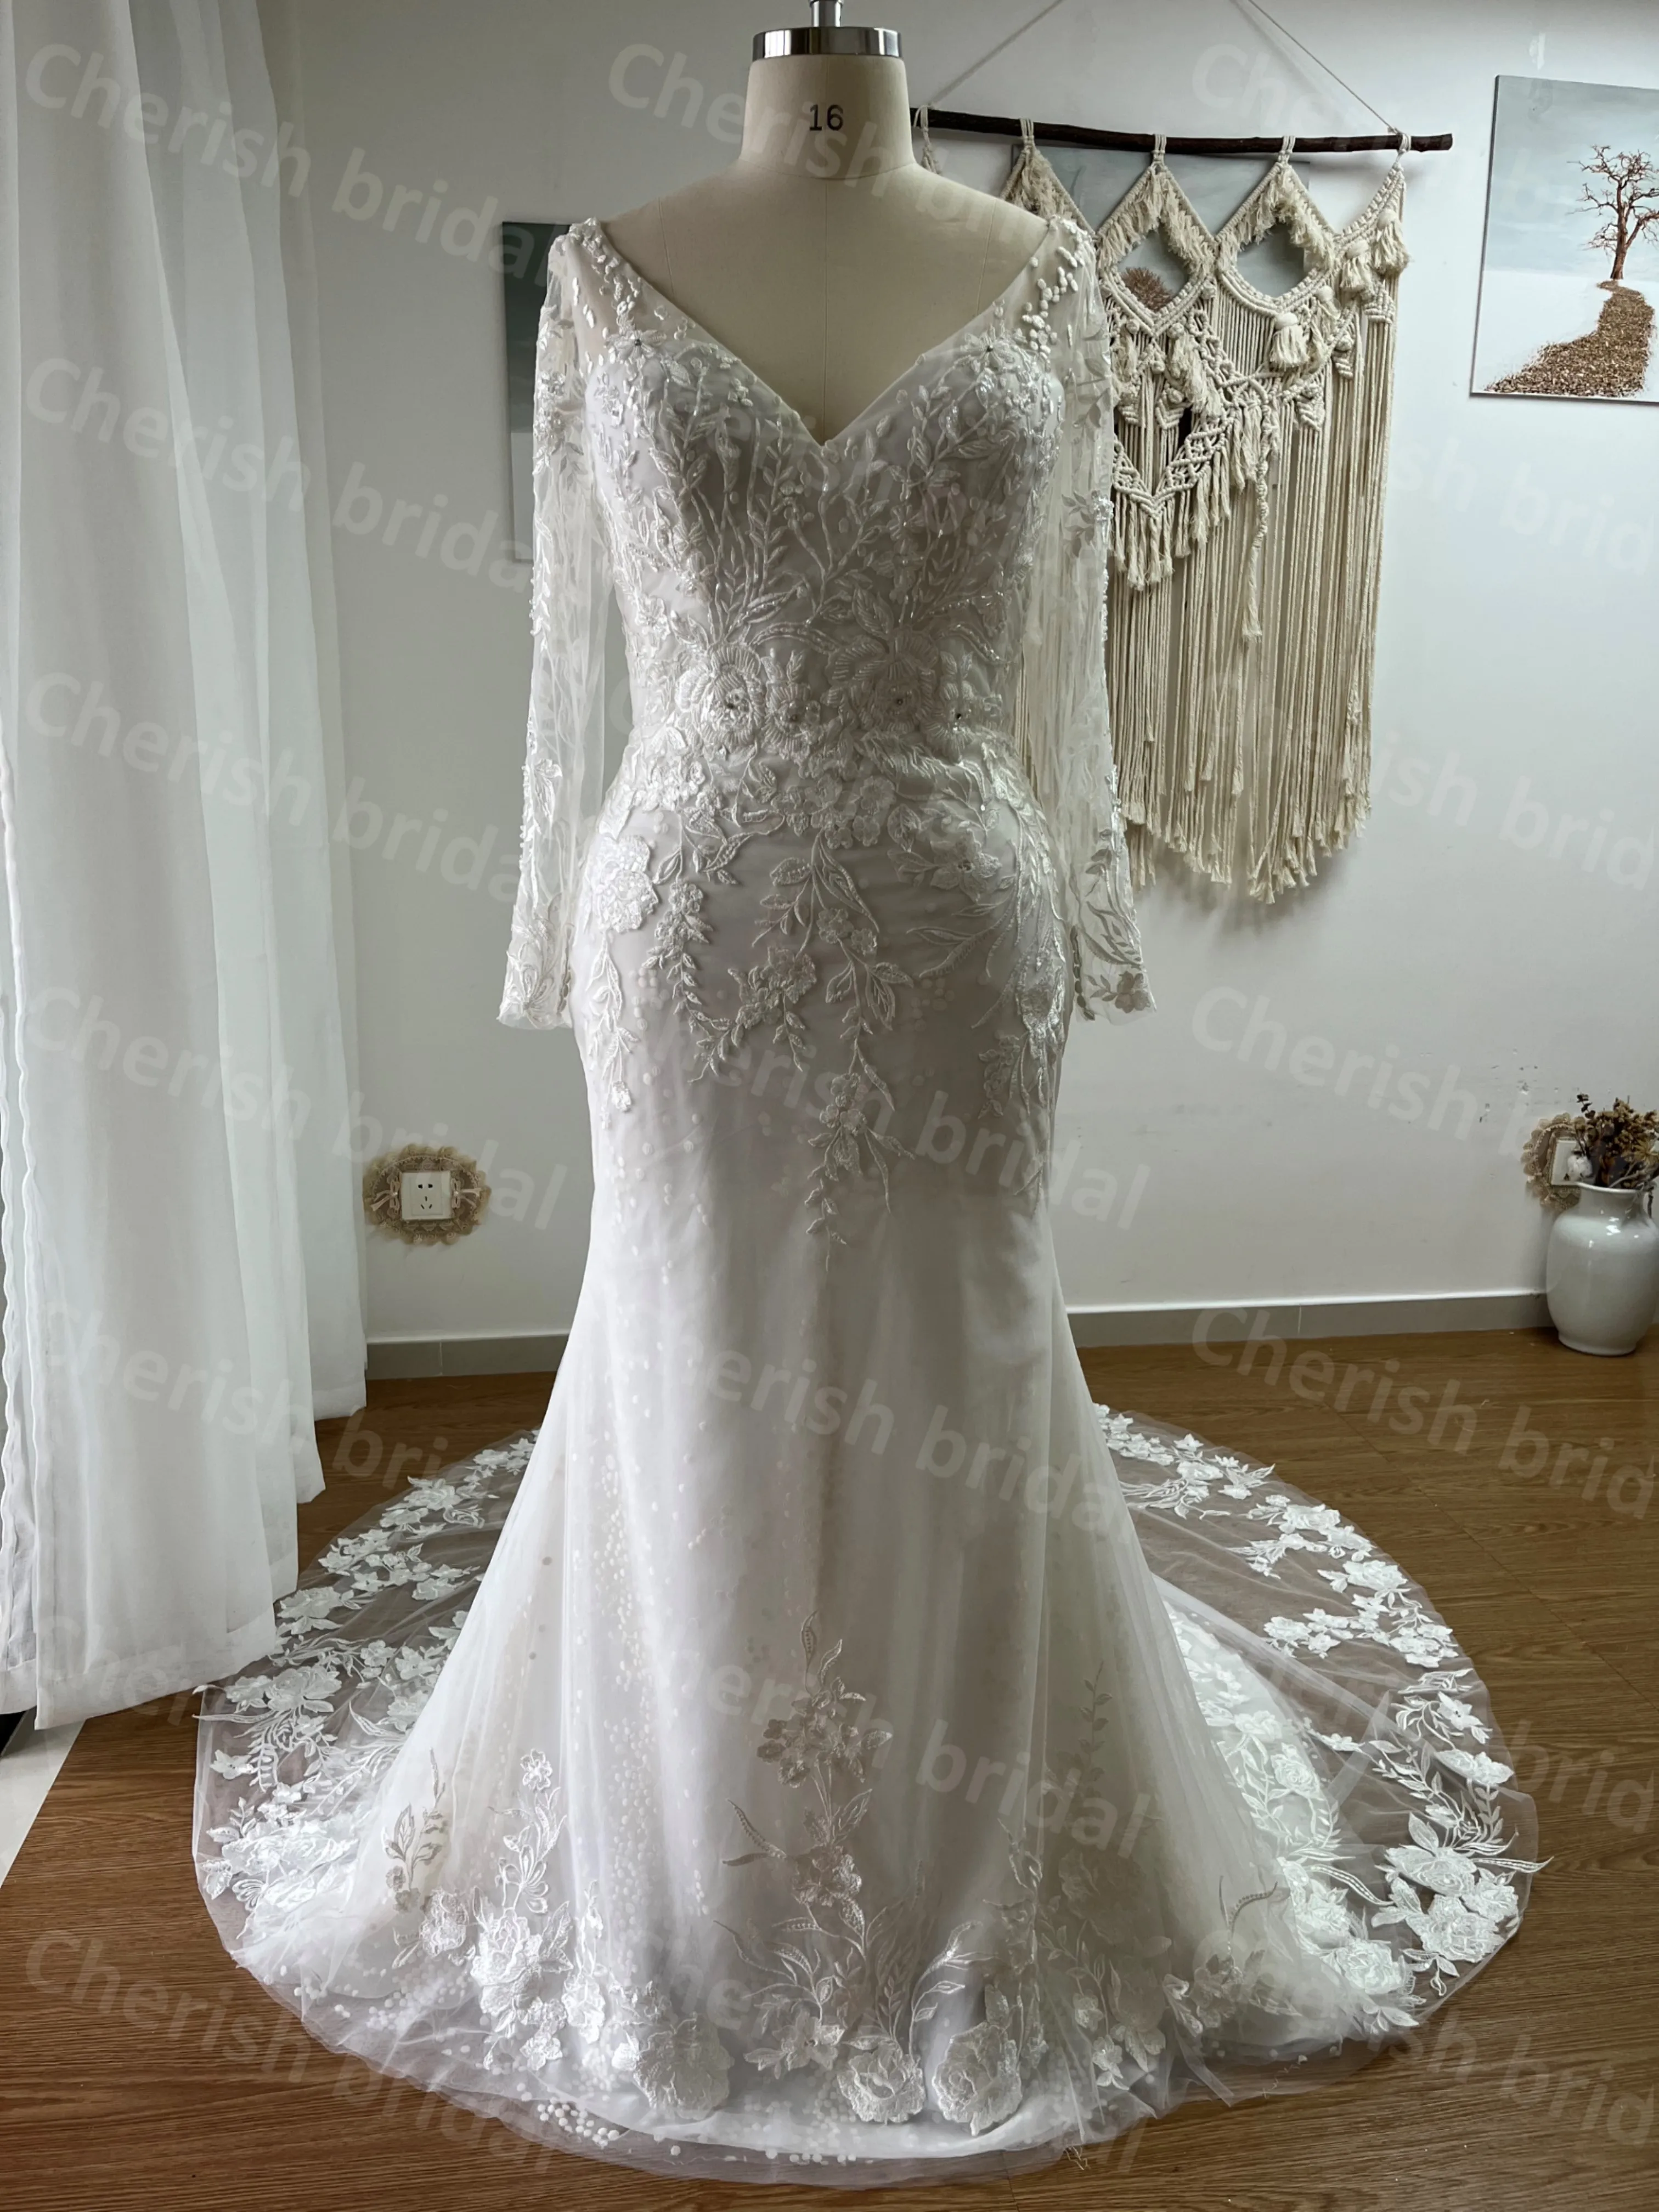 

C5060M Elegant Wedding Dress Mermaid Bride Wedding Dresses for Women Long Sleeves Lace Applique and Beading Ivory Bridal Gown